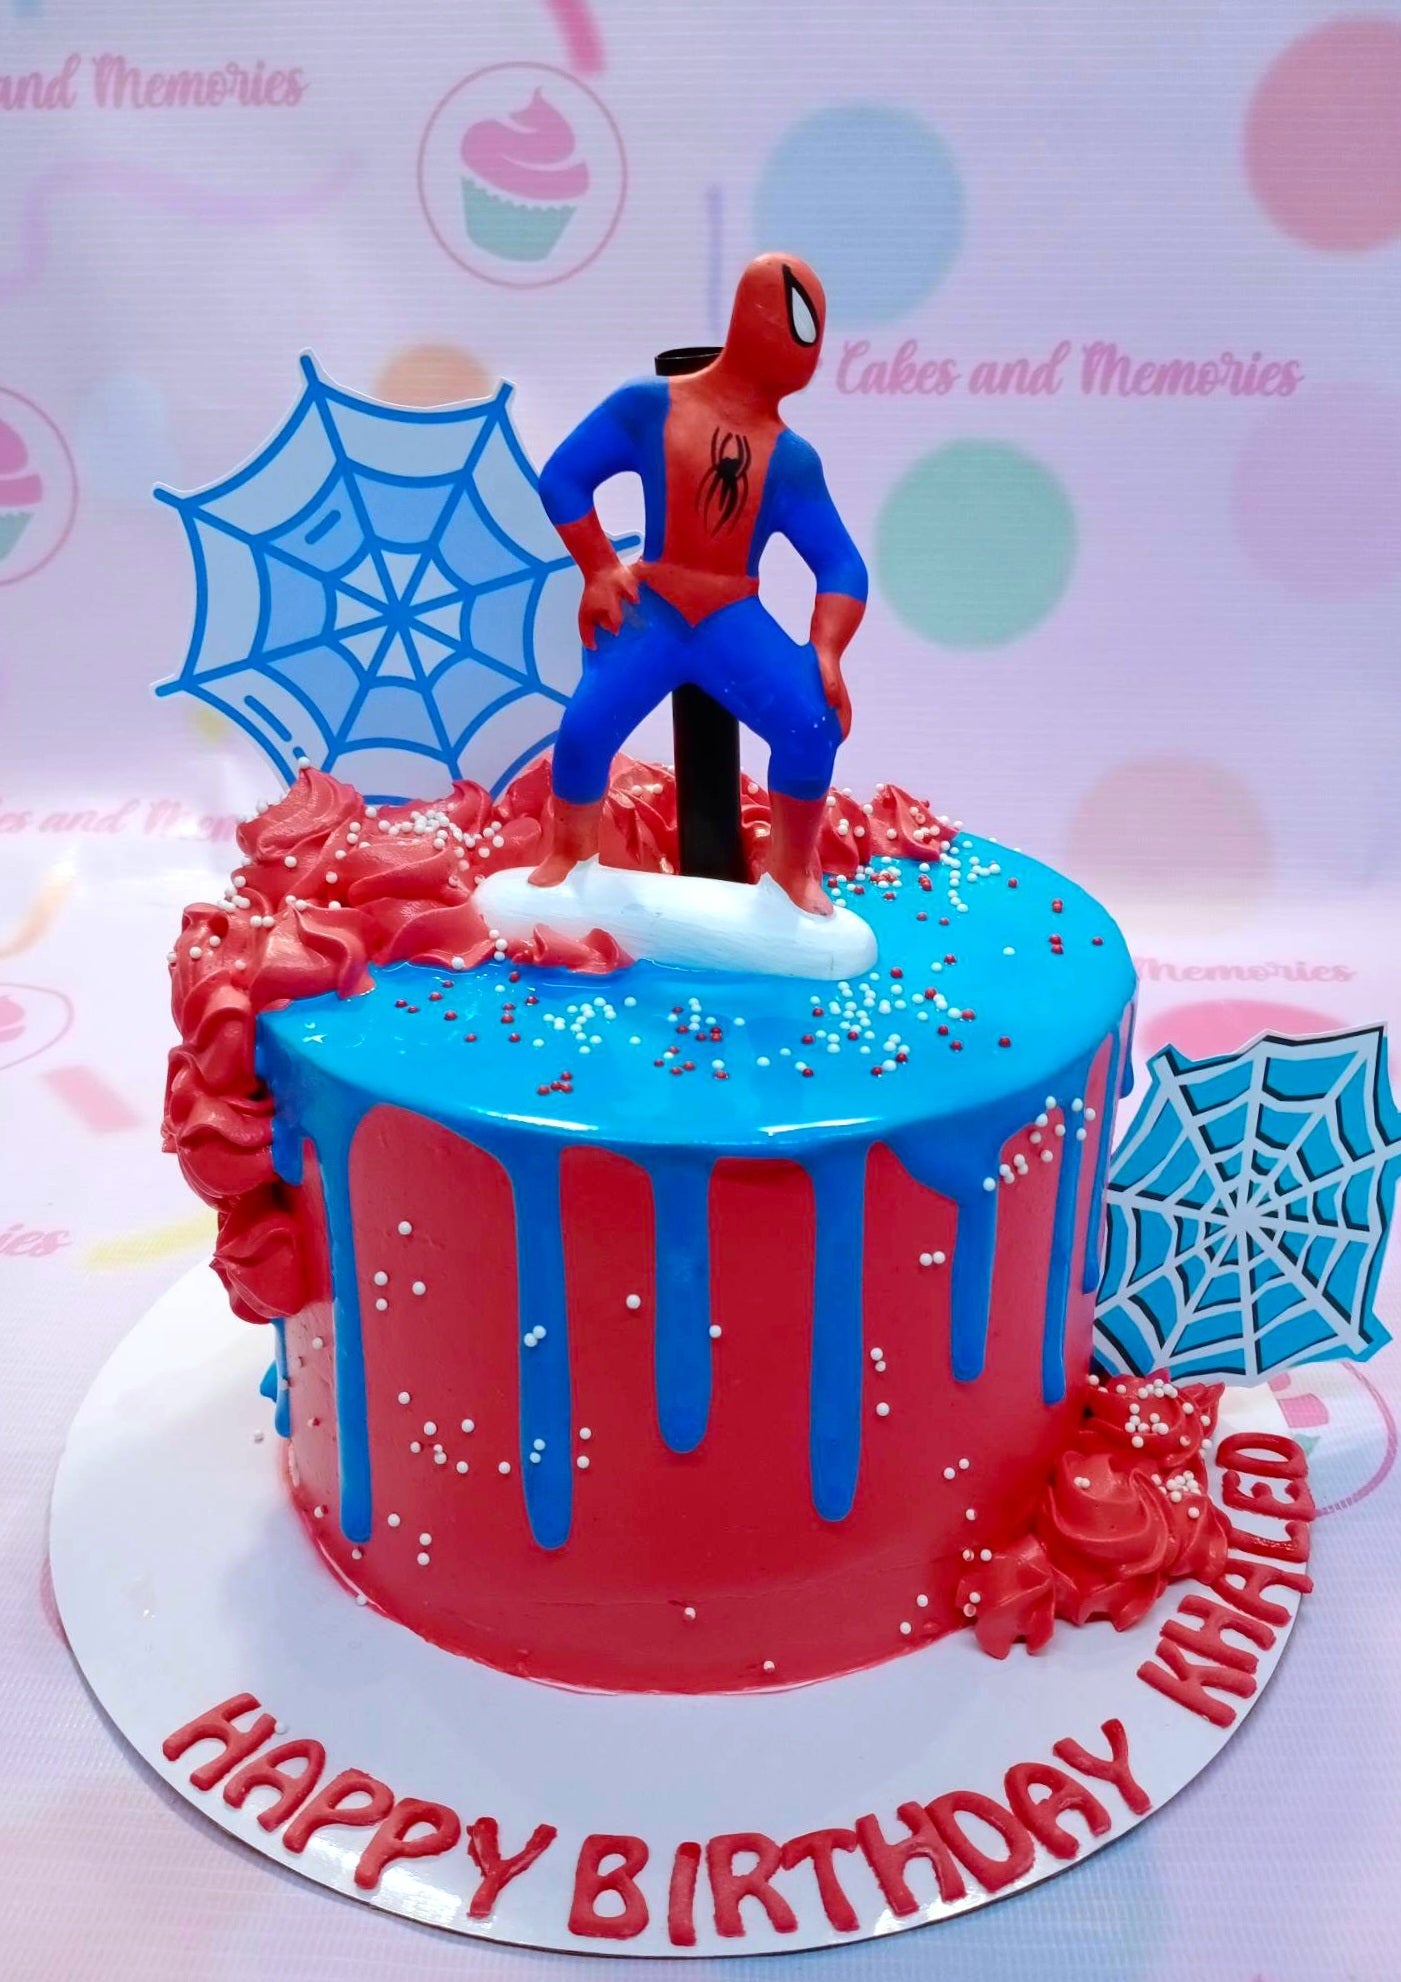 This Spiderman cake is sure to win the hearts of the little superhero in your life. It features a classic blue and red icing with a detailed blue spider web and Spiderman printouts. Perfect for any birthday celebration or Avengers fan! This high quality, custom designed cake is sure to be the showstopper of the party.